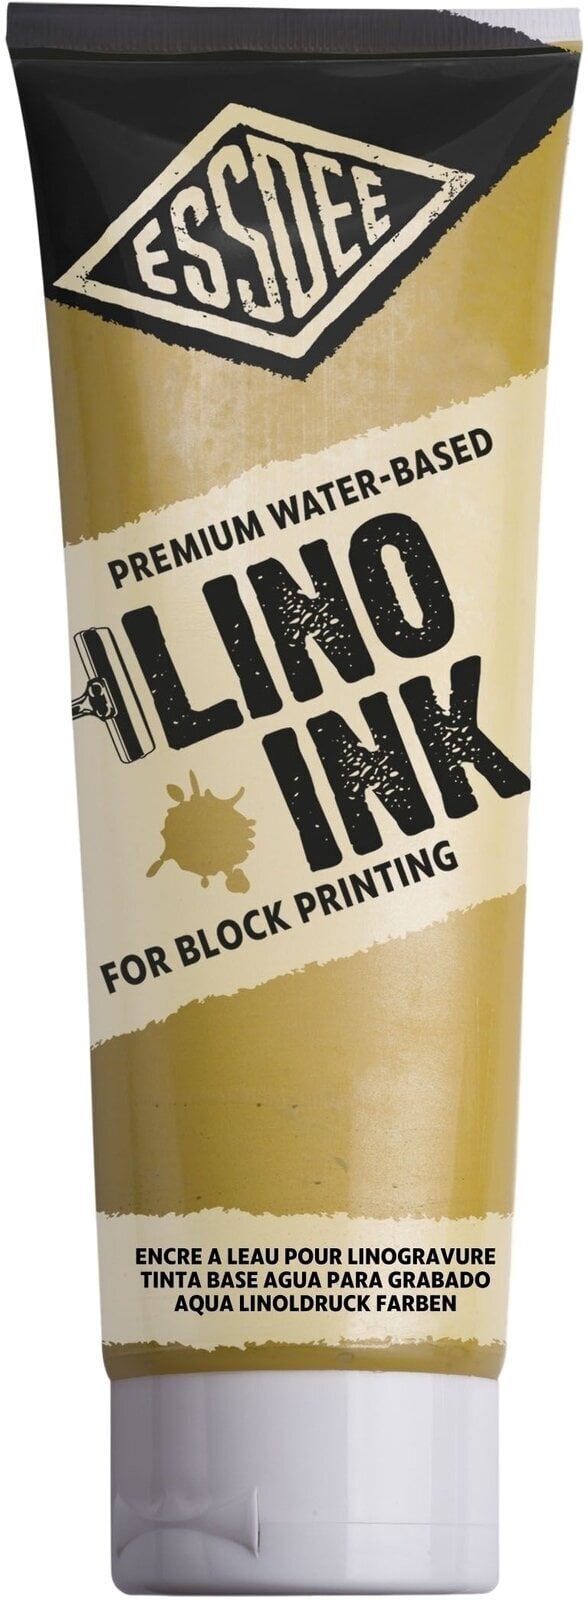 Paint For Linocut Essdee Block Printing Ink Paint For Linocut Pearlescent Yellow 300 ml